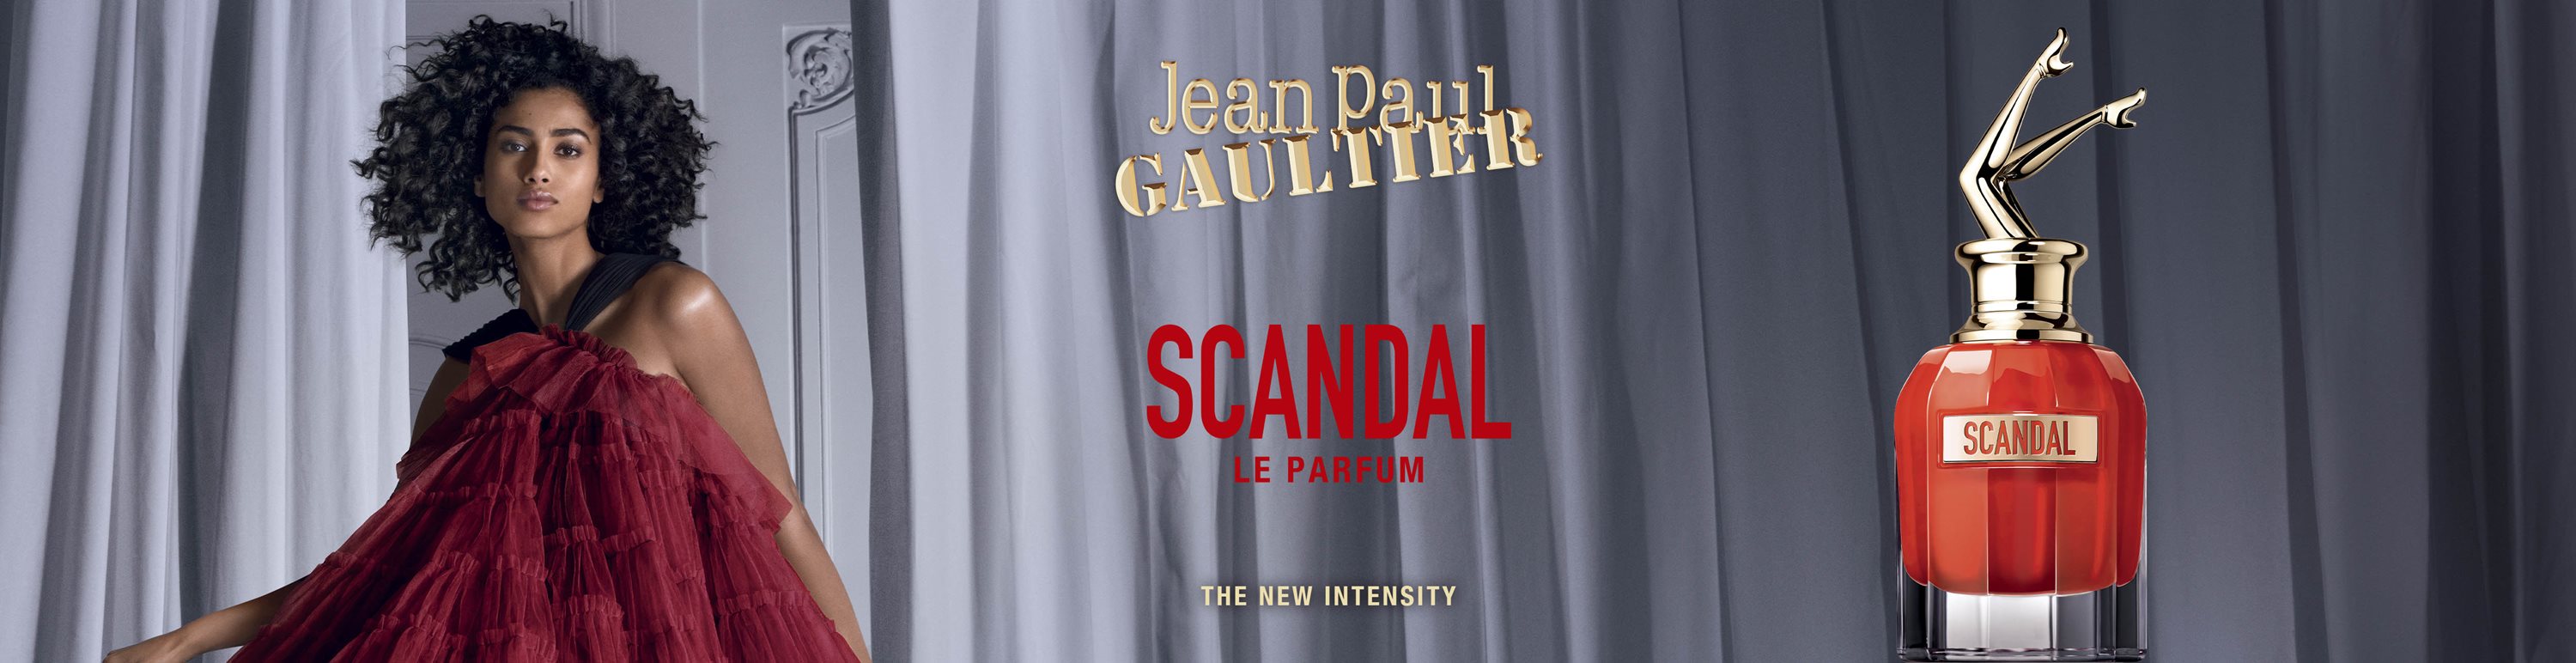 Are you ready for Jean Paul Gaultier's Scandal? - The Perfume Society